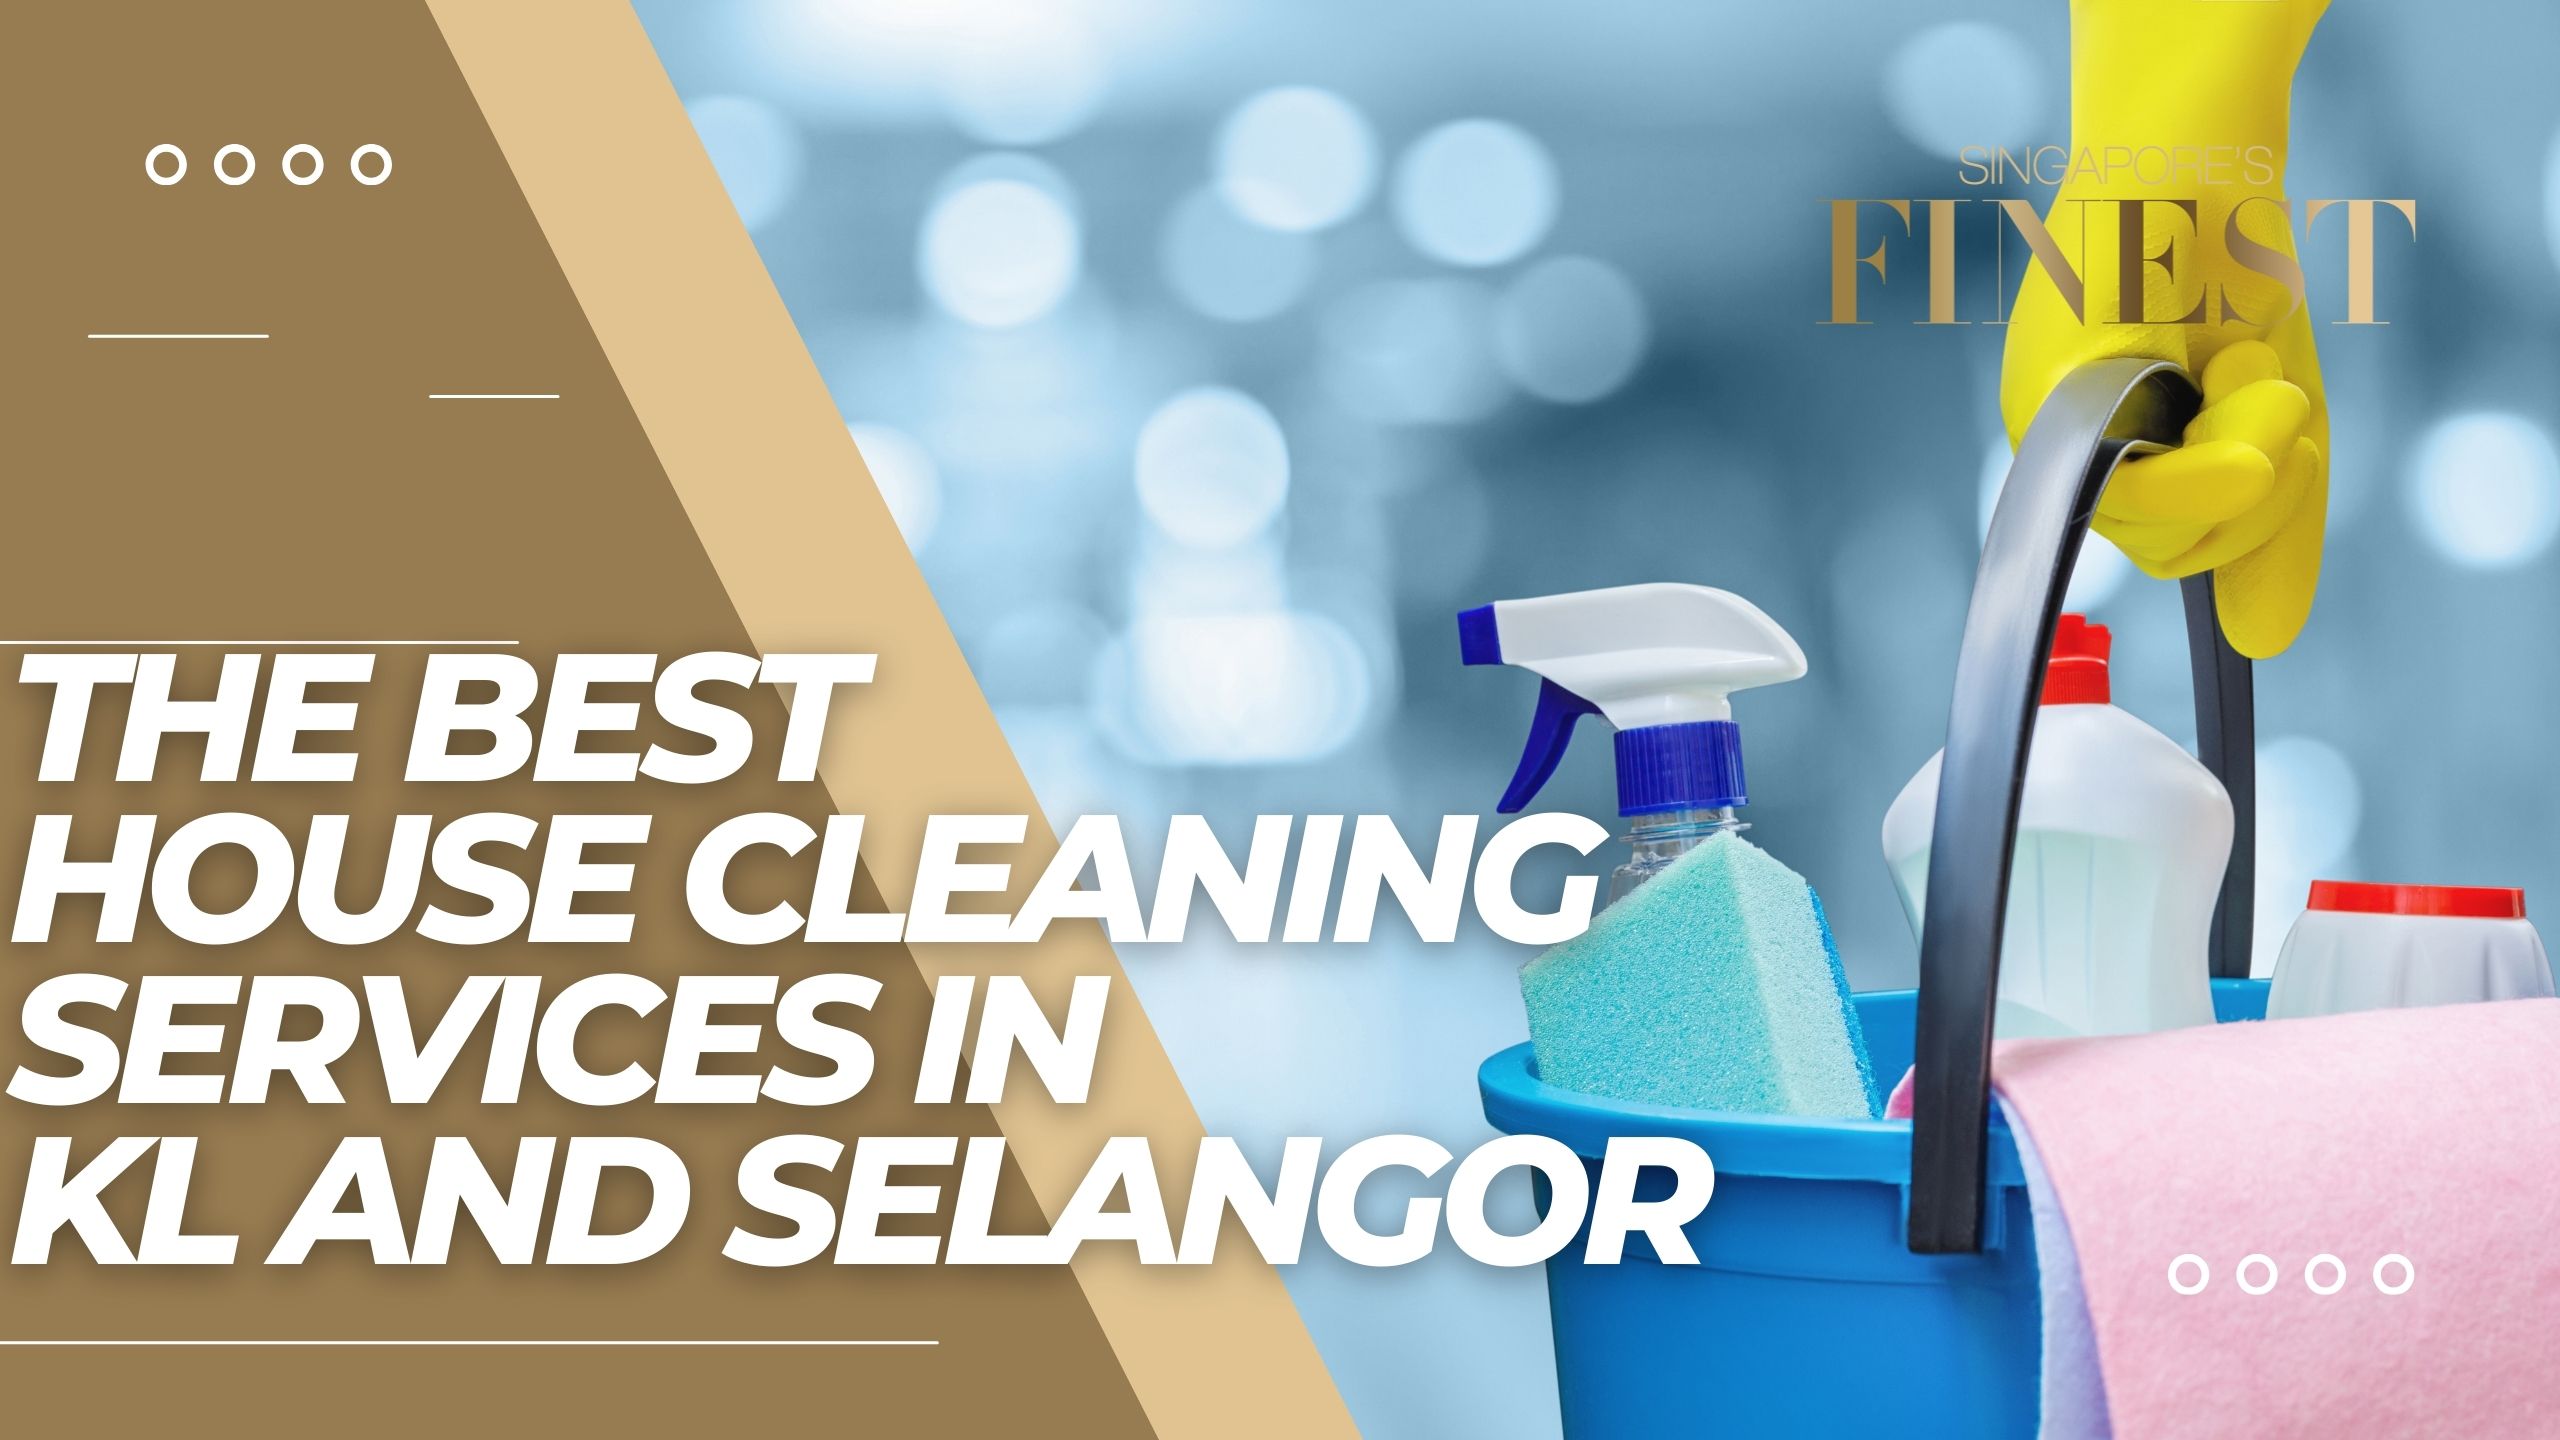 The Finest House Cleaning Services in KL and Selangor